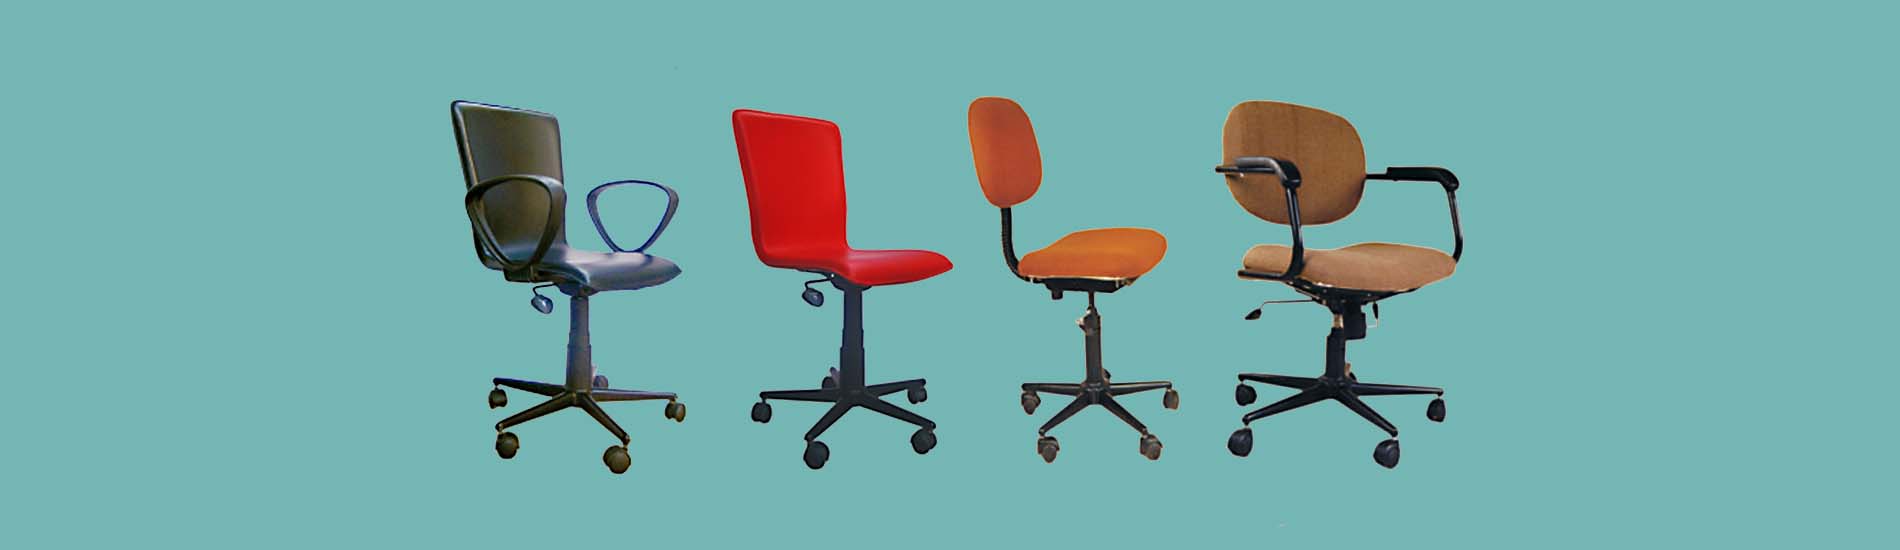 Best Chair Manufactures in Bangalore